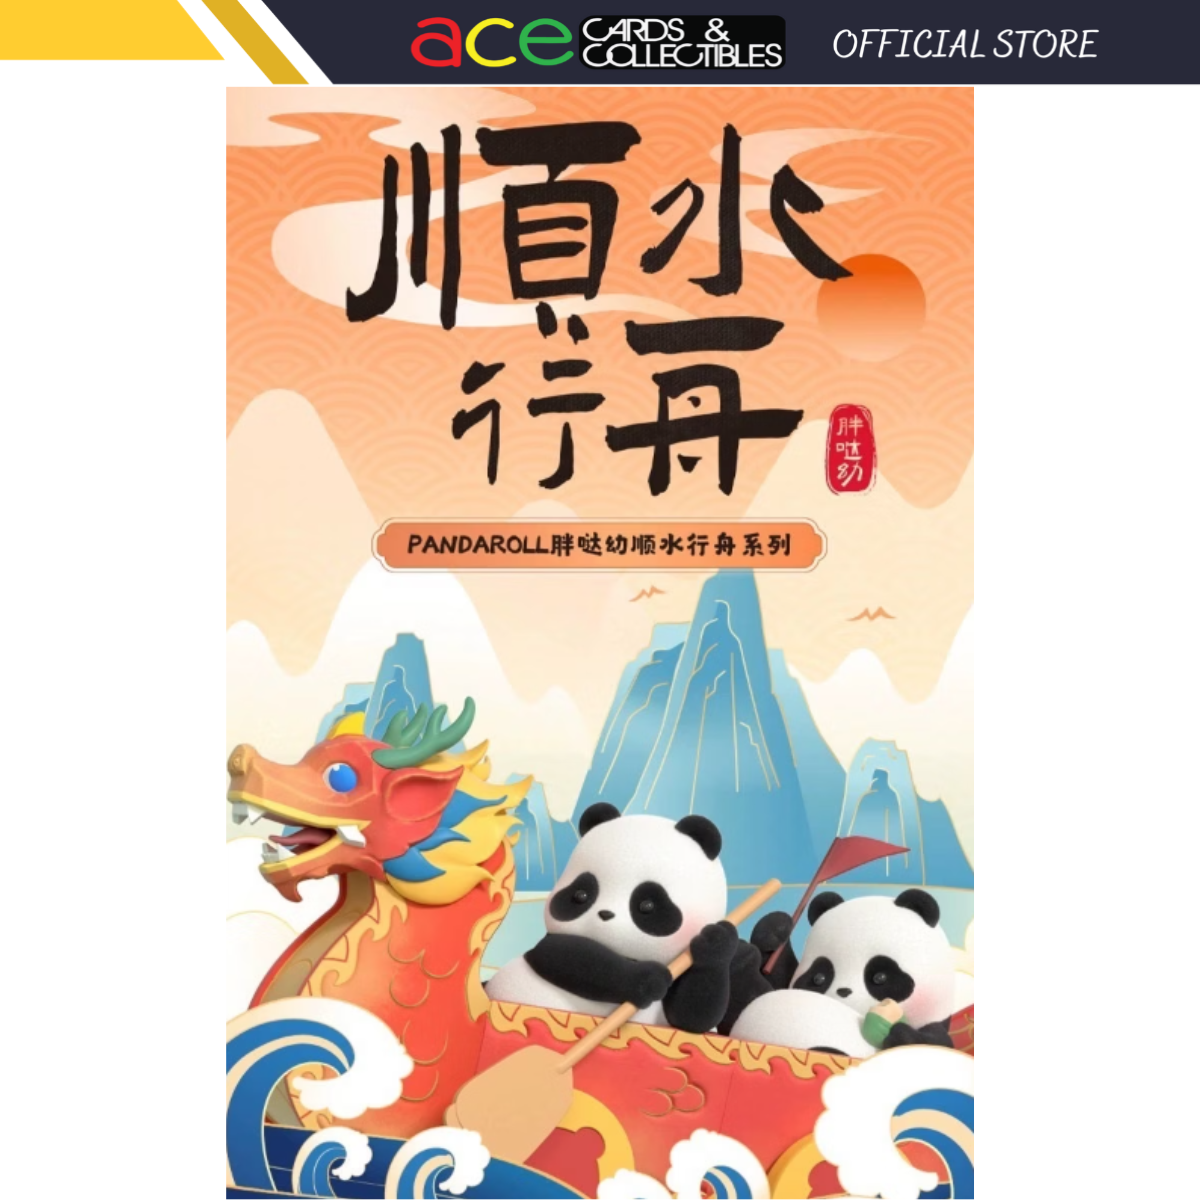 52Toys x Panda Roll Panda “Go With The Flow" Series-Single Box (Random)-52Toys-Ace Cards & Collectibles